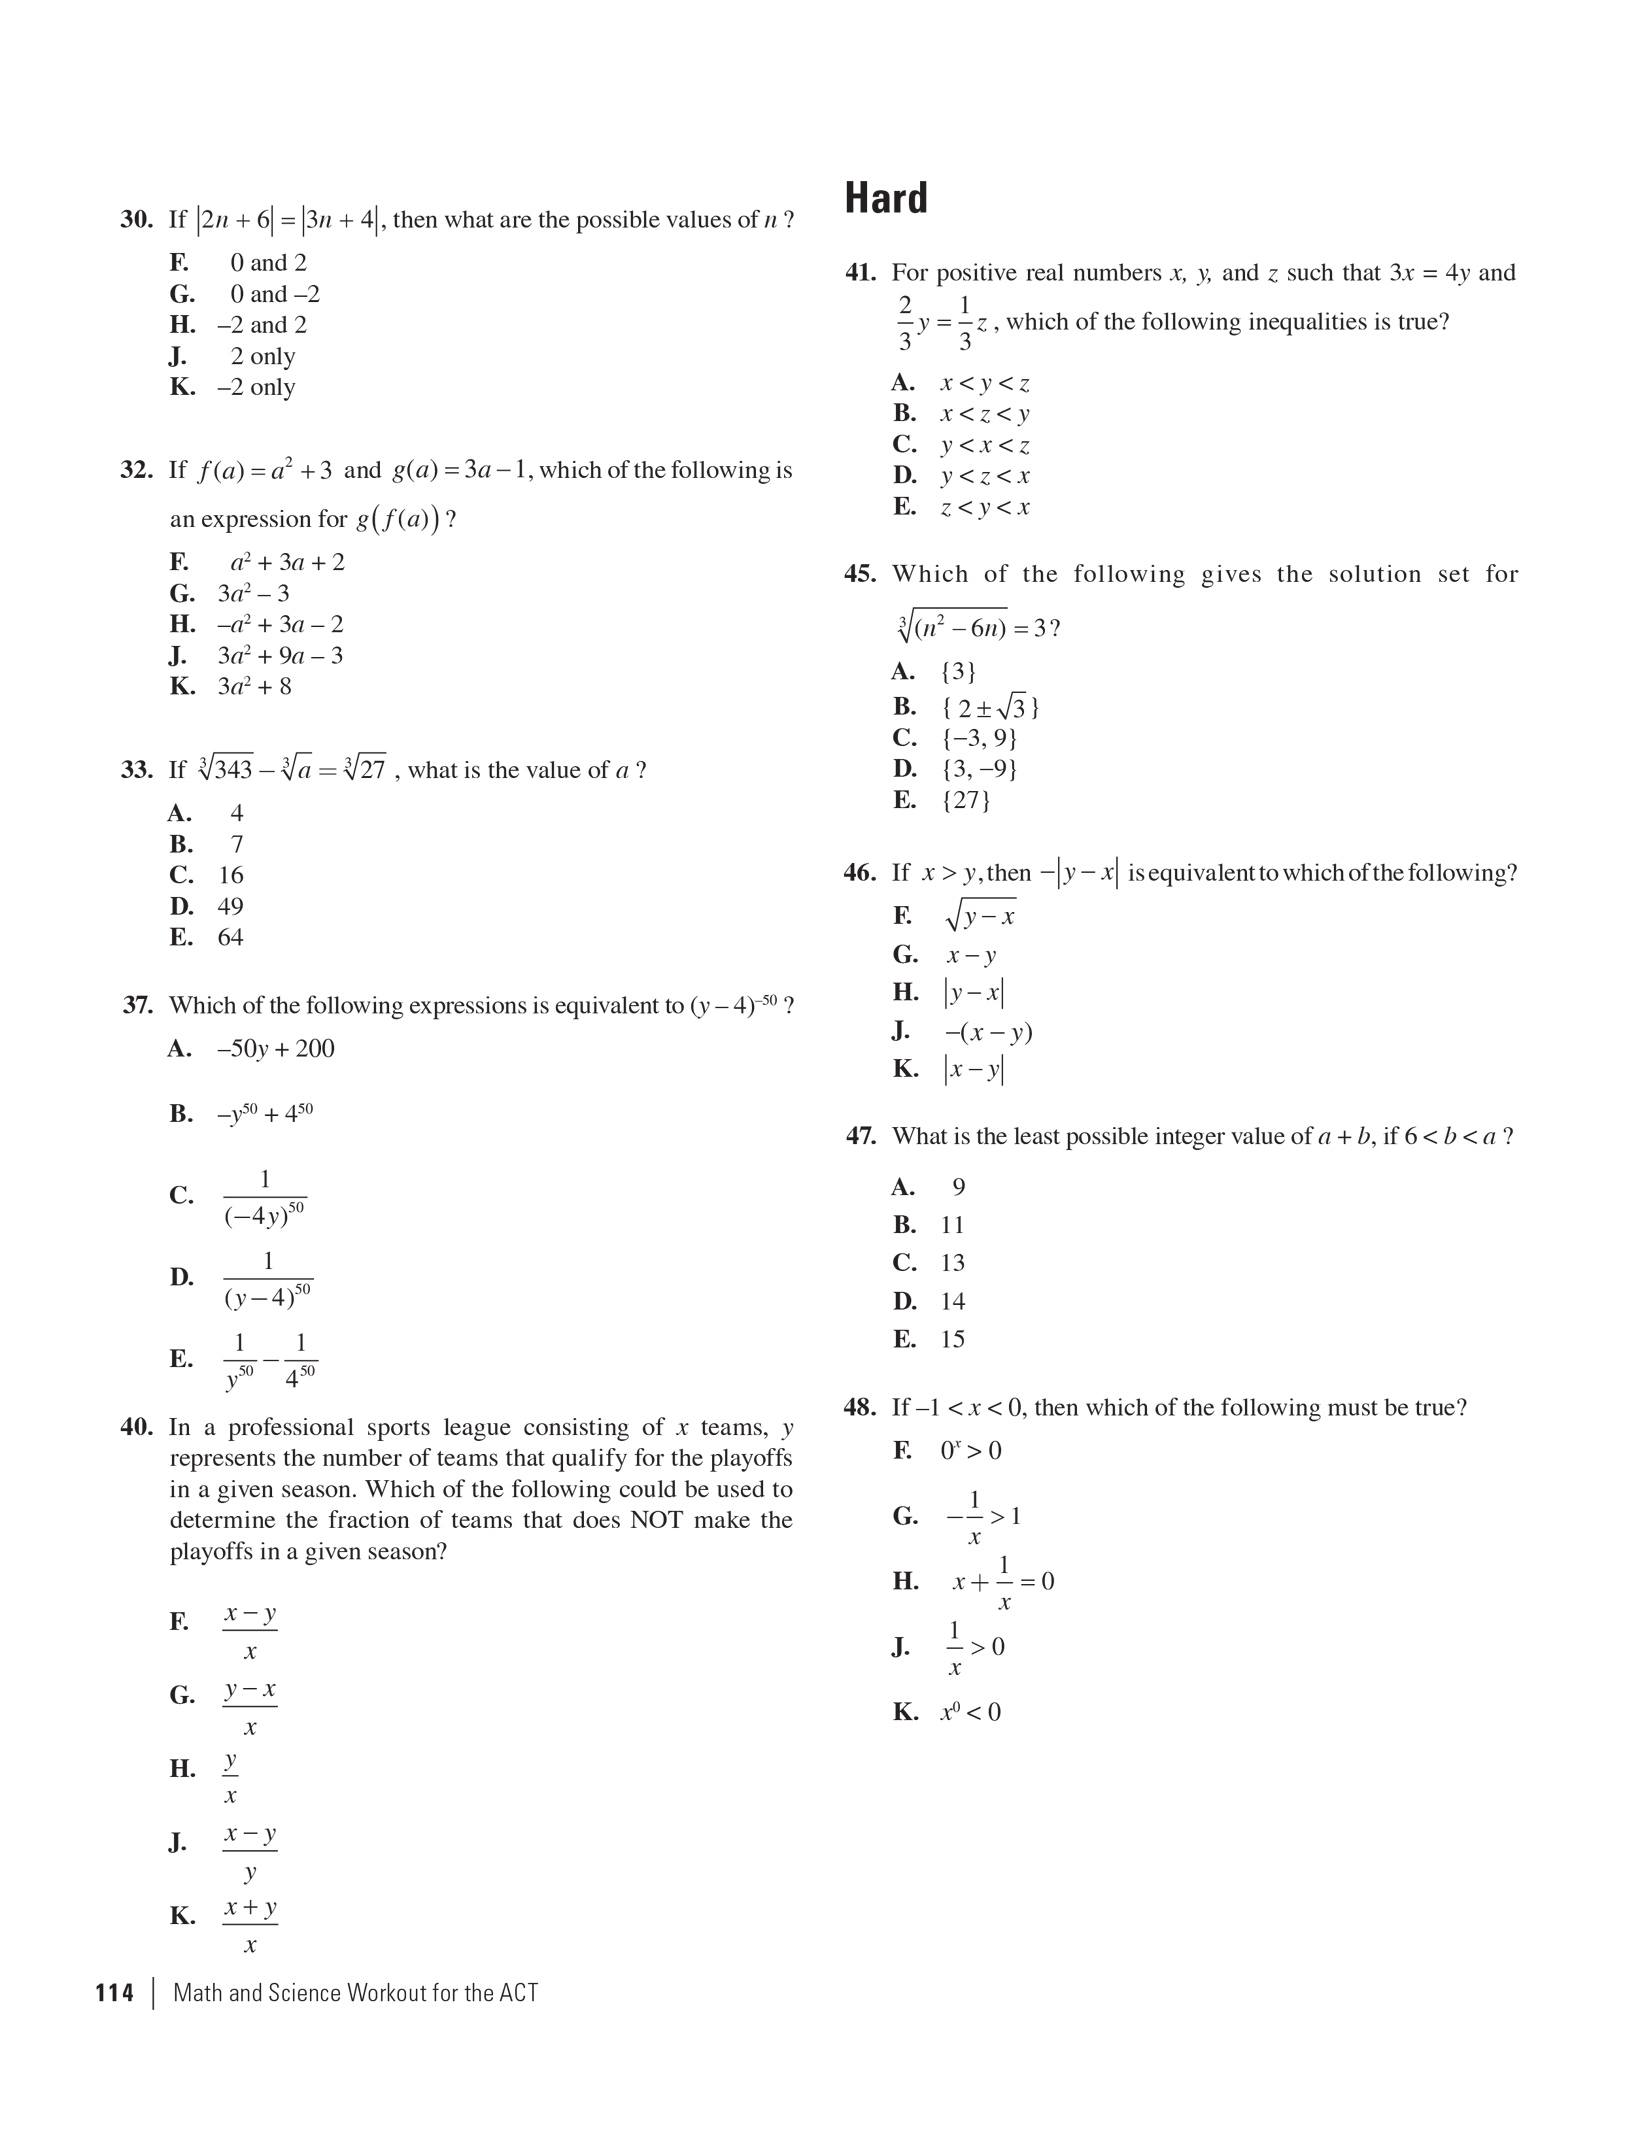 Extended ebook content for Math and Science Workout for the ACT, 4th ...